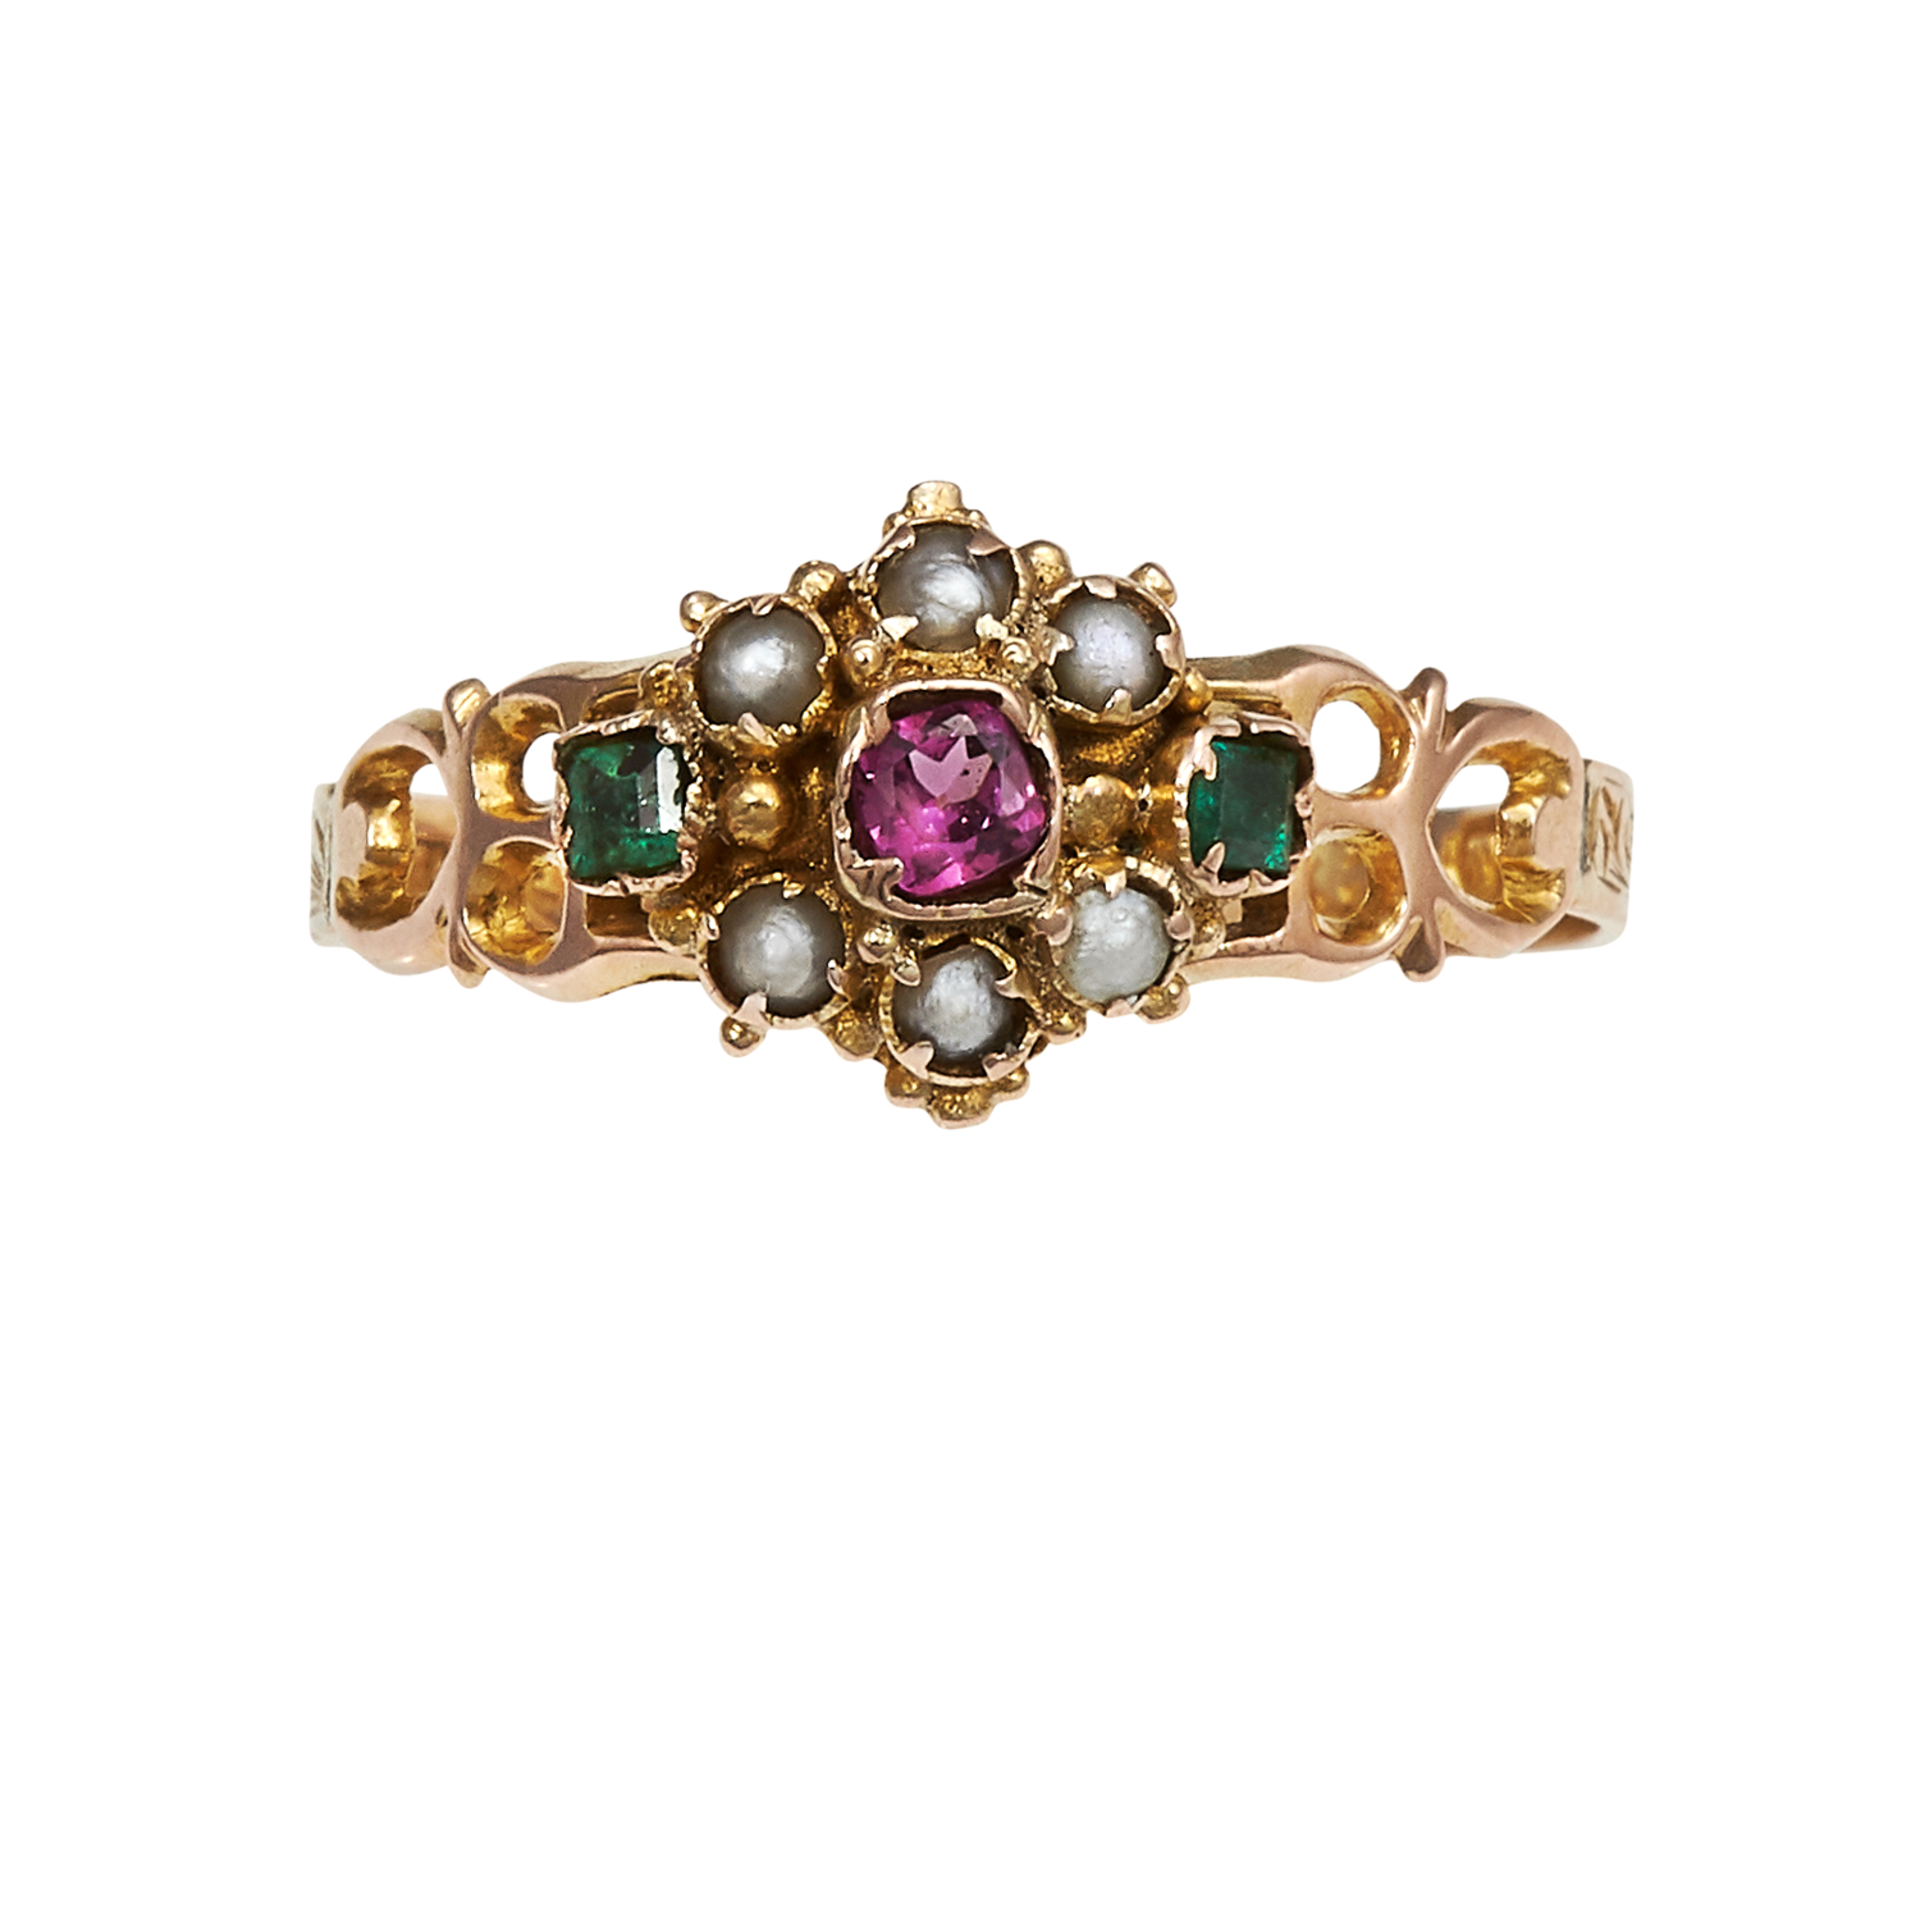 AN ANTIQUE GARNET, EMERALD AND PEARL RING, CIRCA 1870 in yellow gold, the principal garnet and pearl